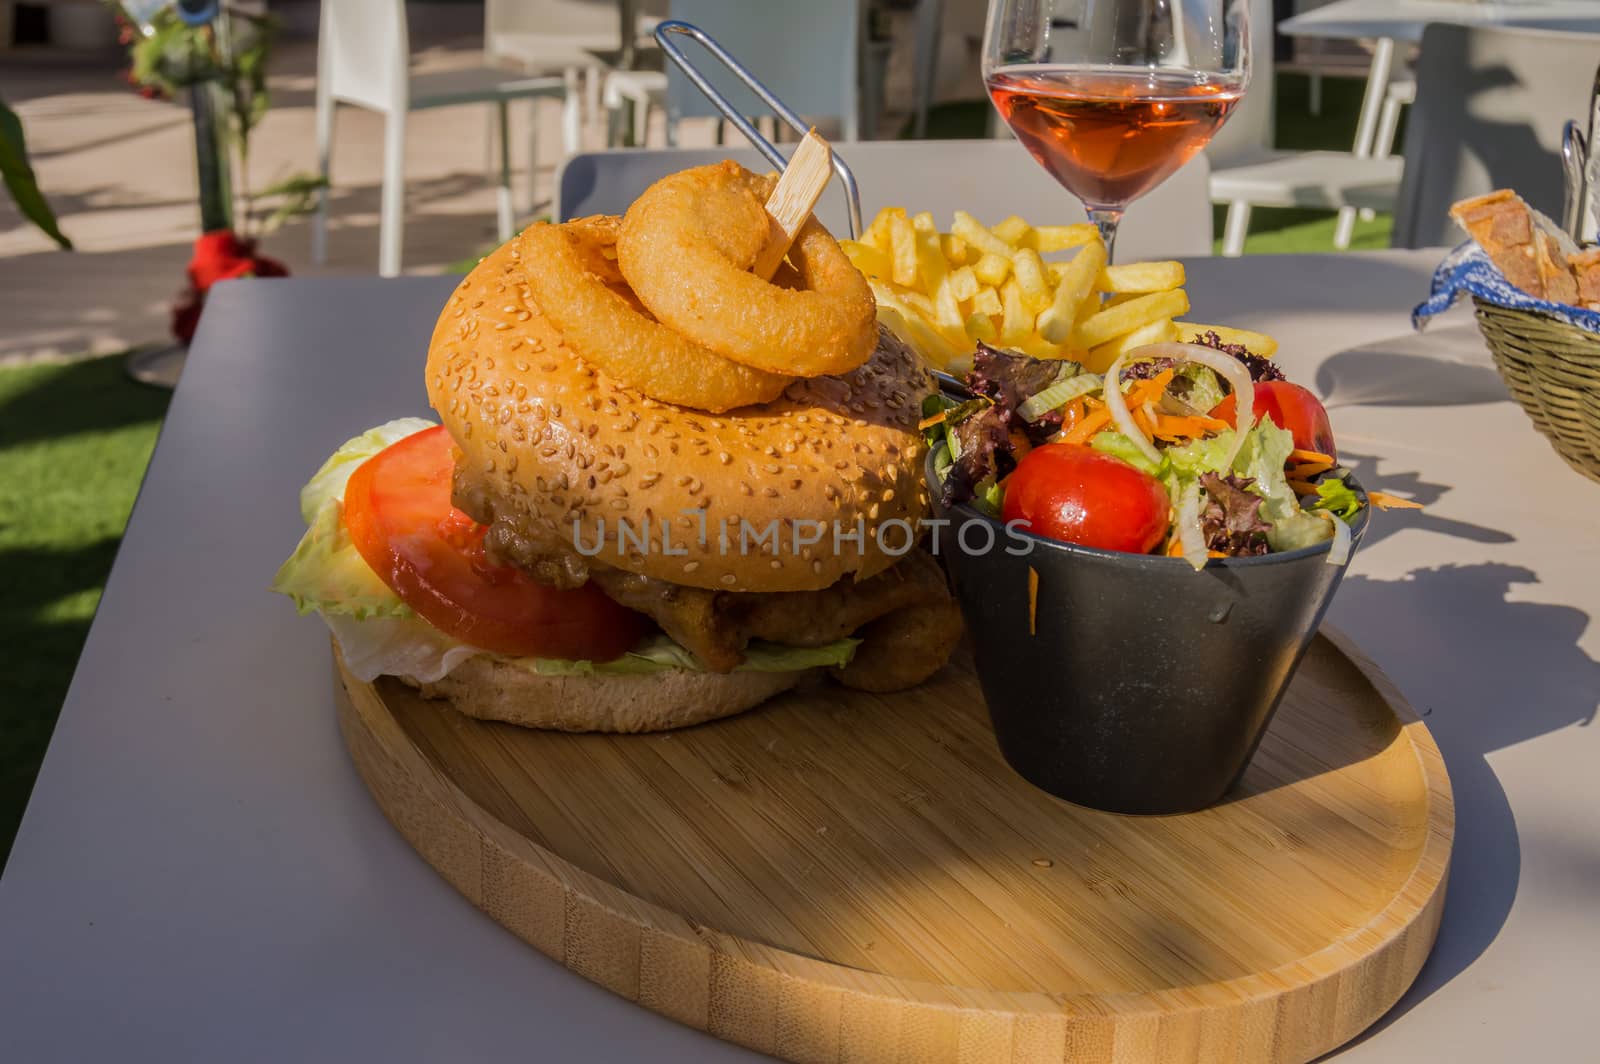 Chicken burger with fried calamari slices on a wooden board  by Philou1000